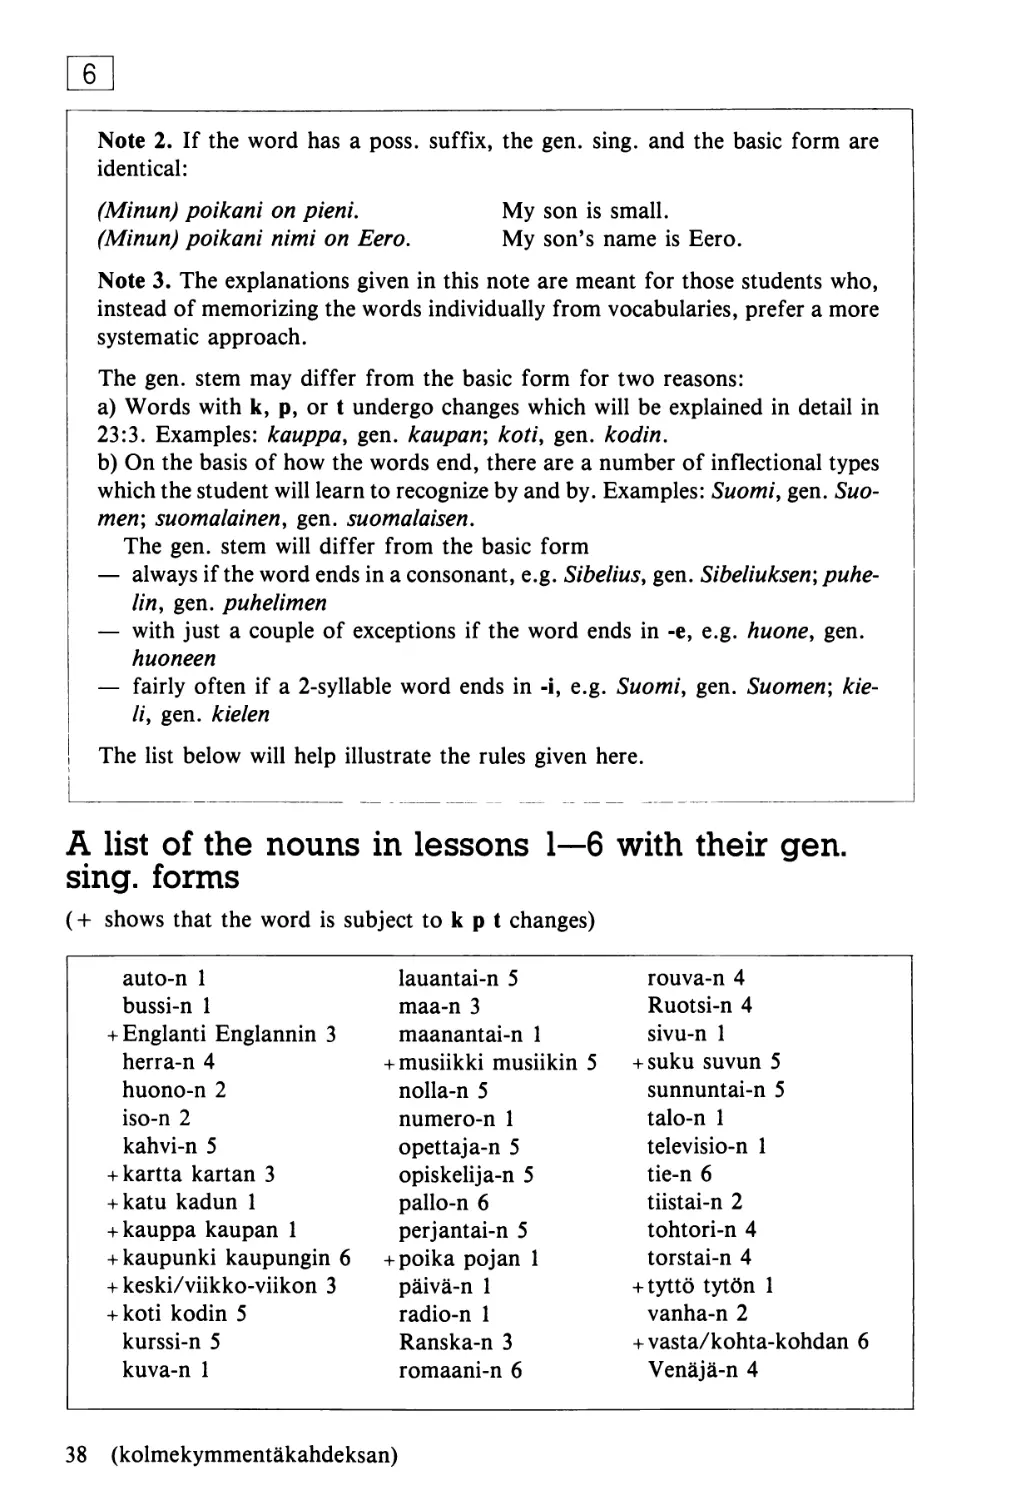 A list of the nouns in lessons 1—6 with their gen. sing, forms